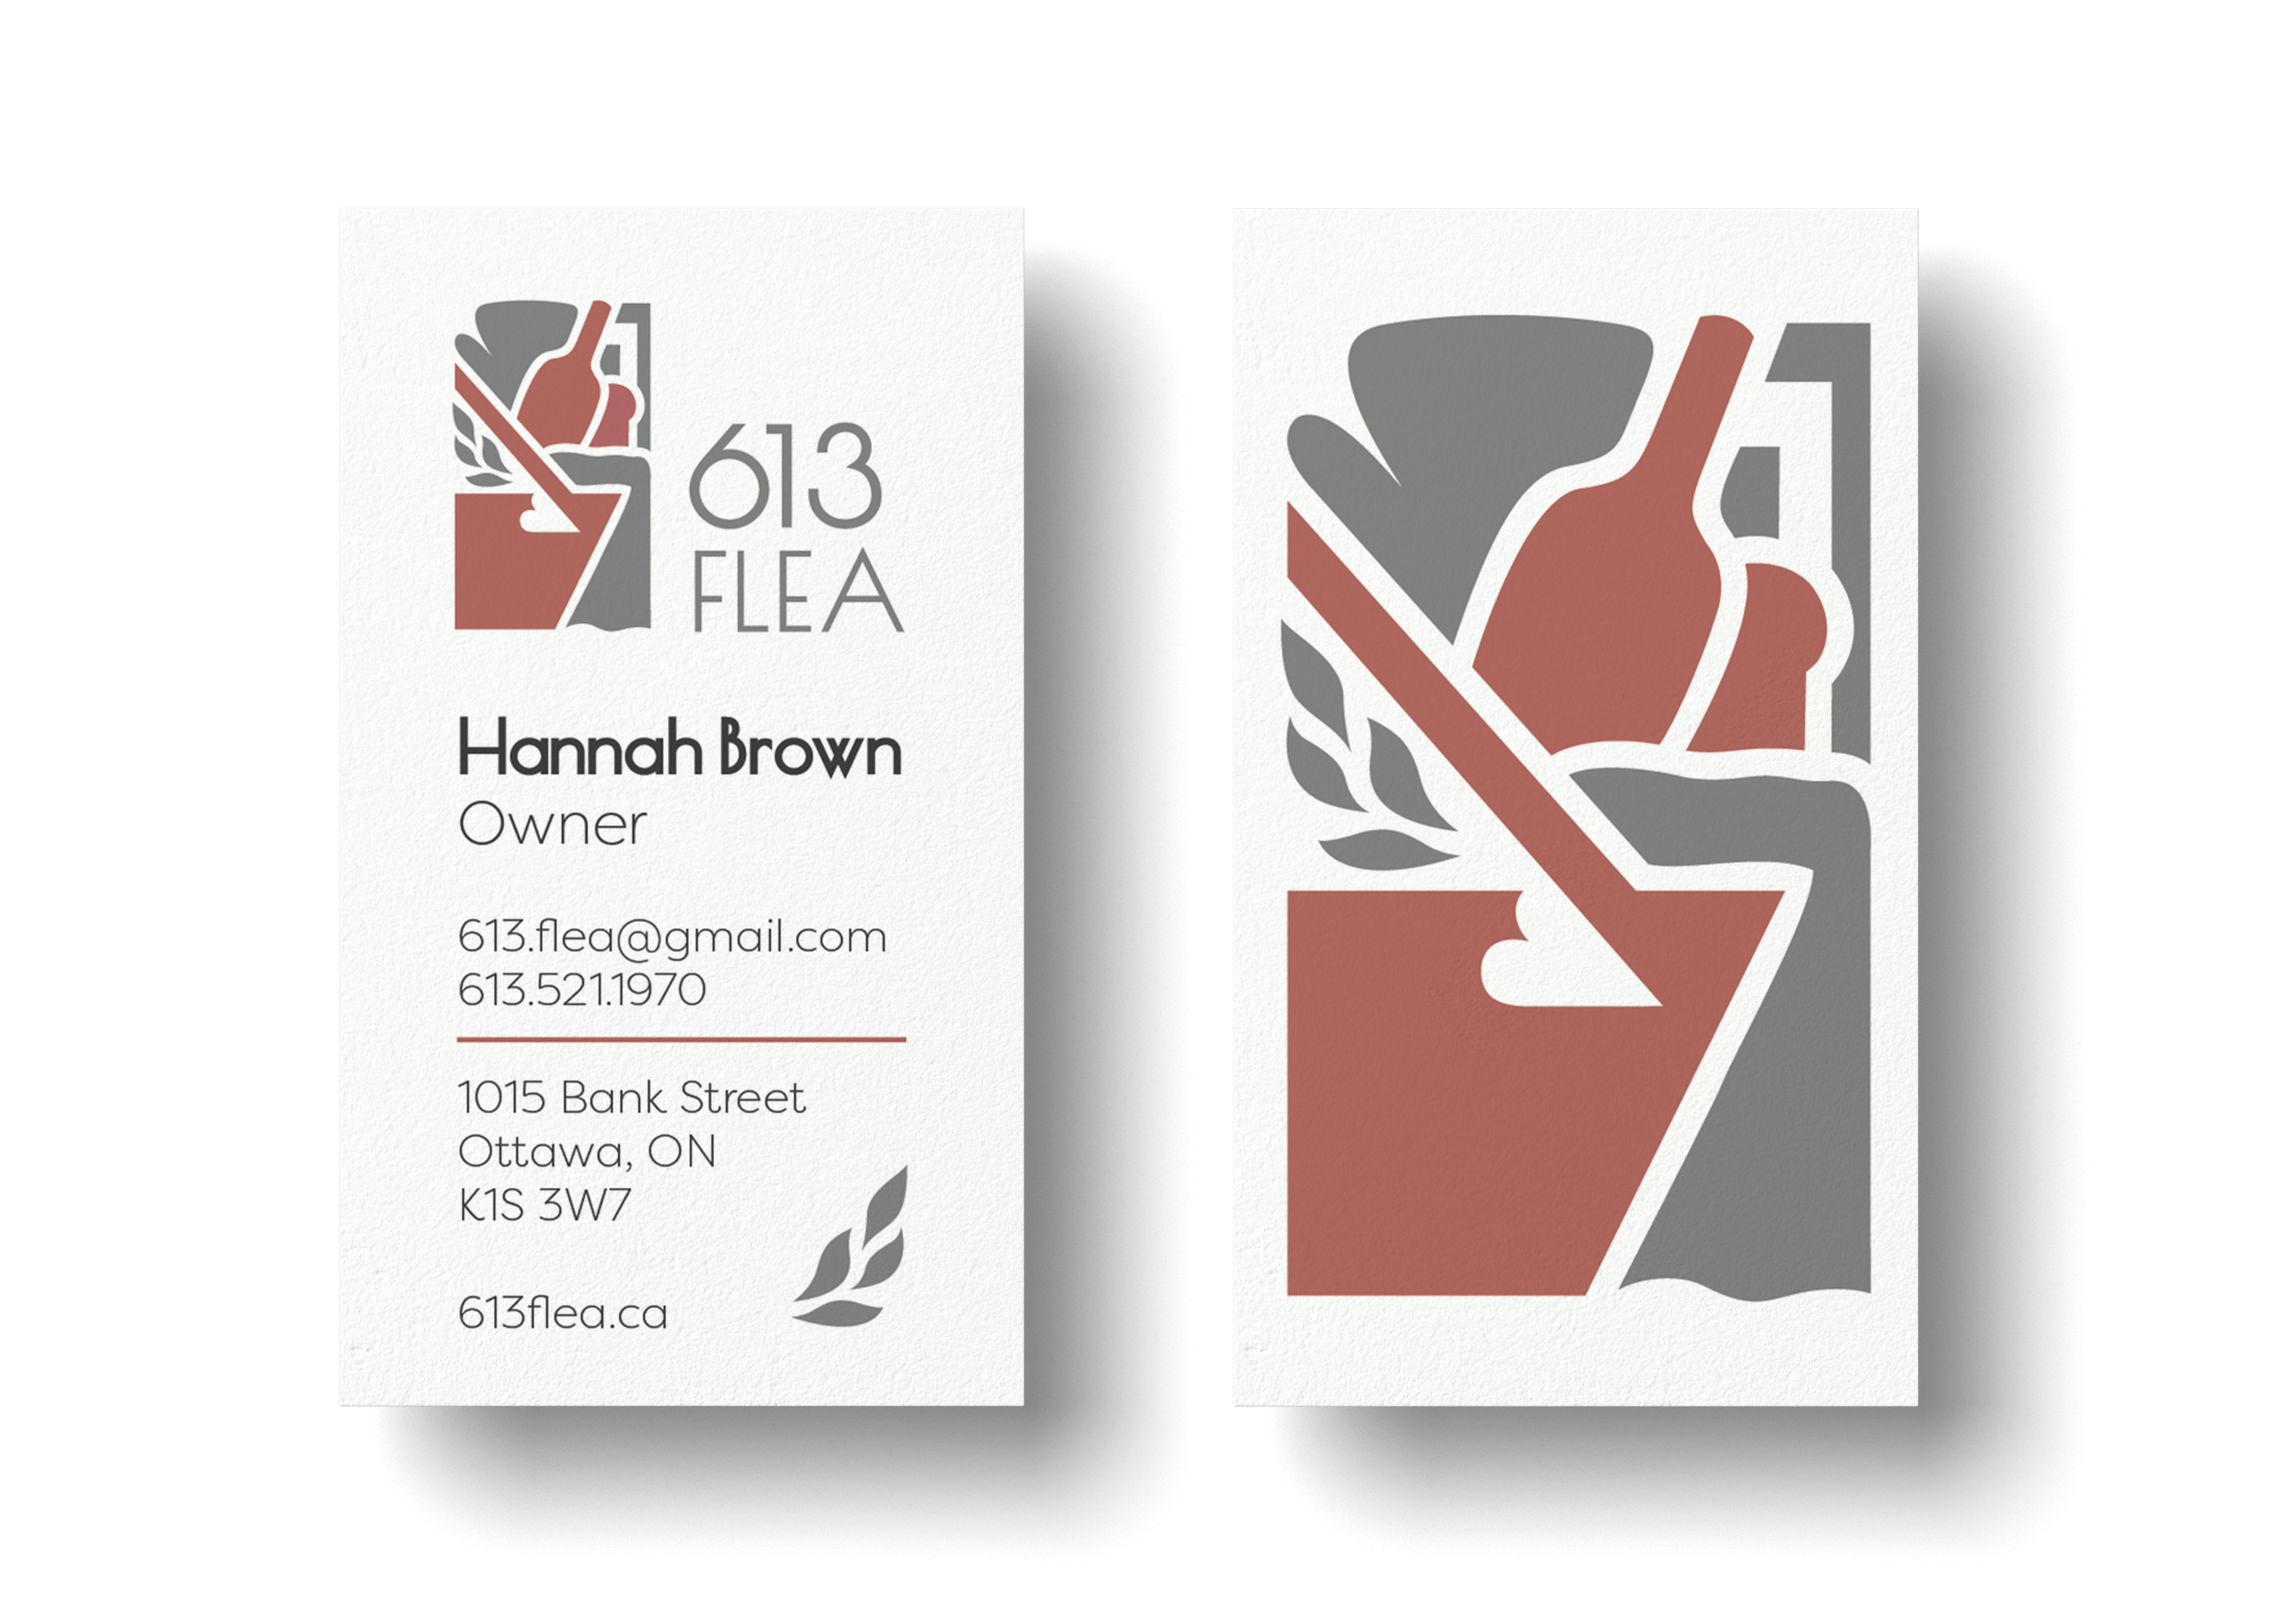 Two business cards branded with the updated 613 Flea logo.